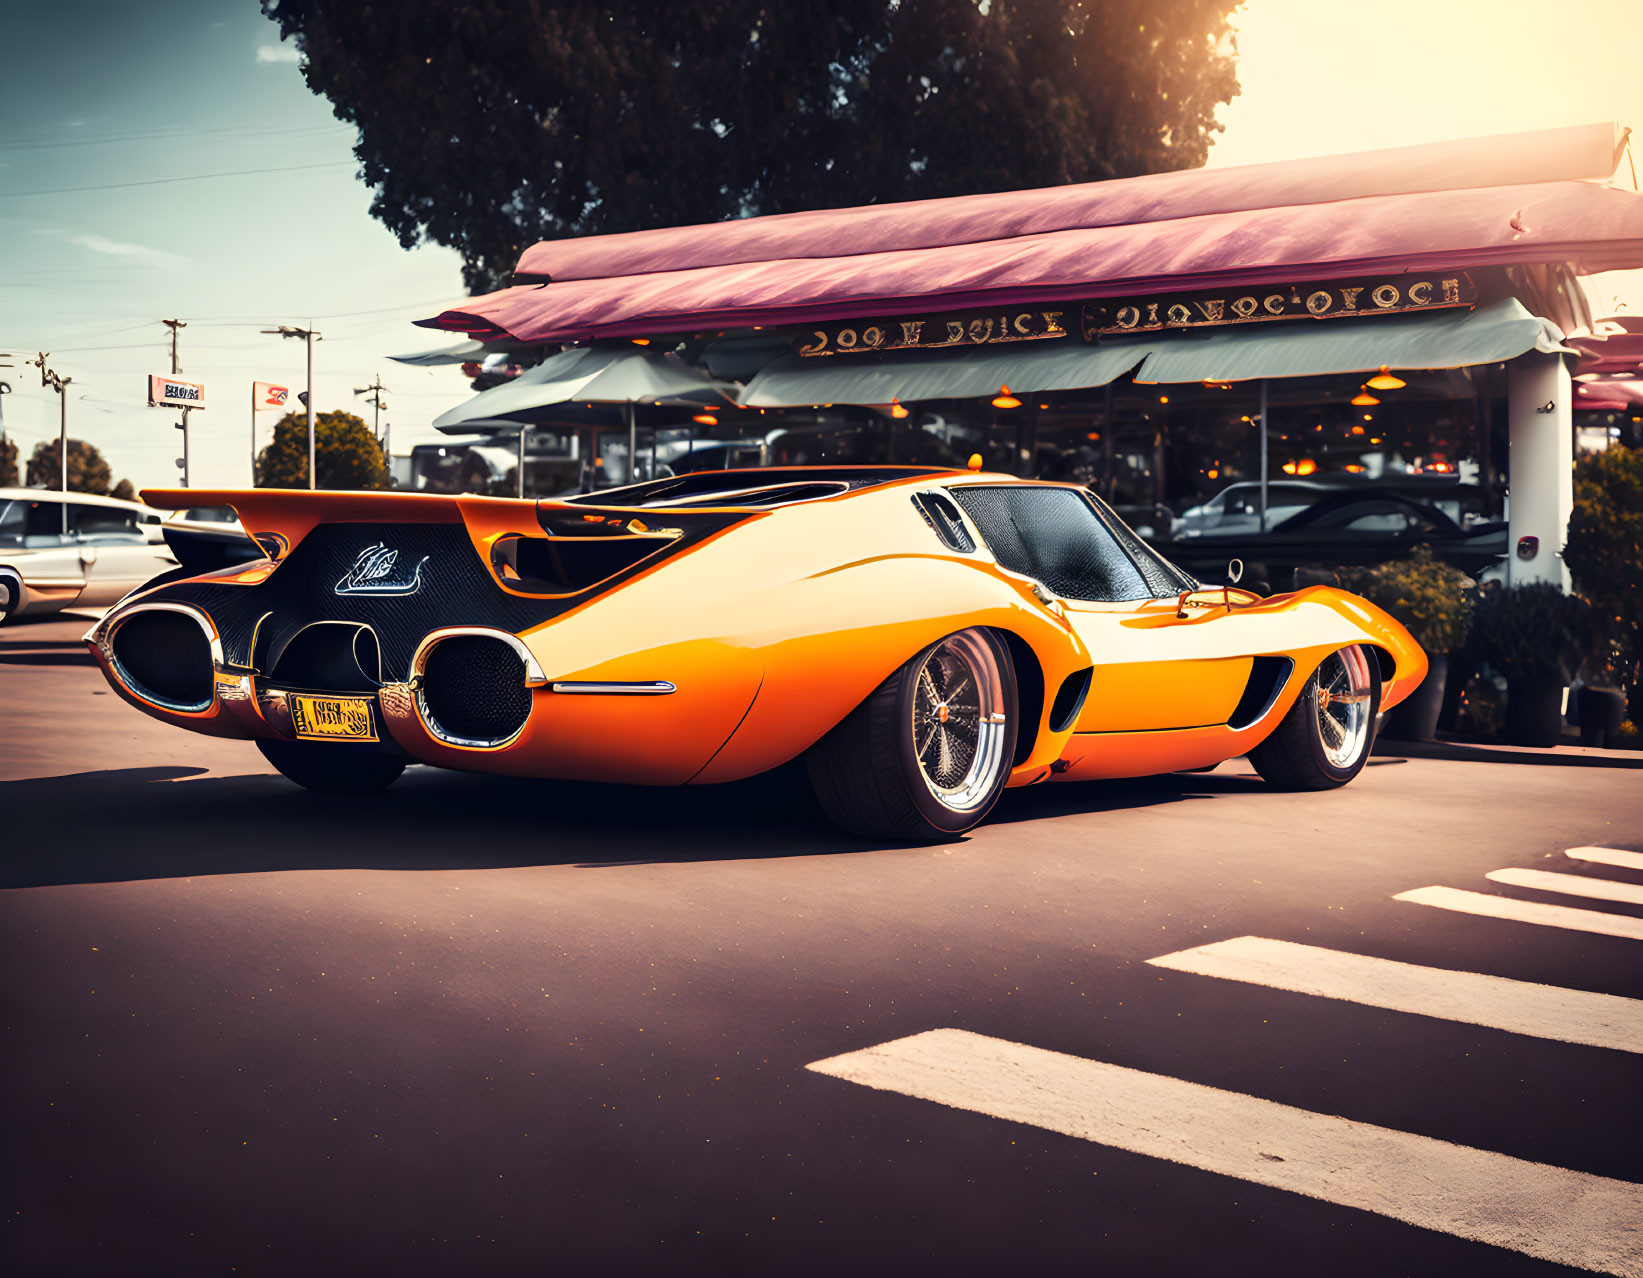 Vintage orange sports car with twin exhausts parked at sunset